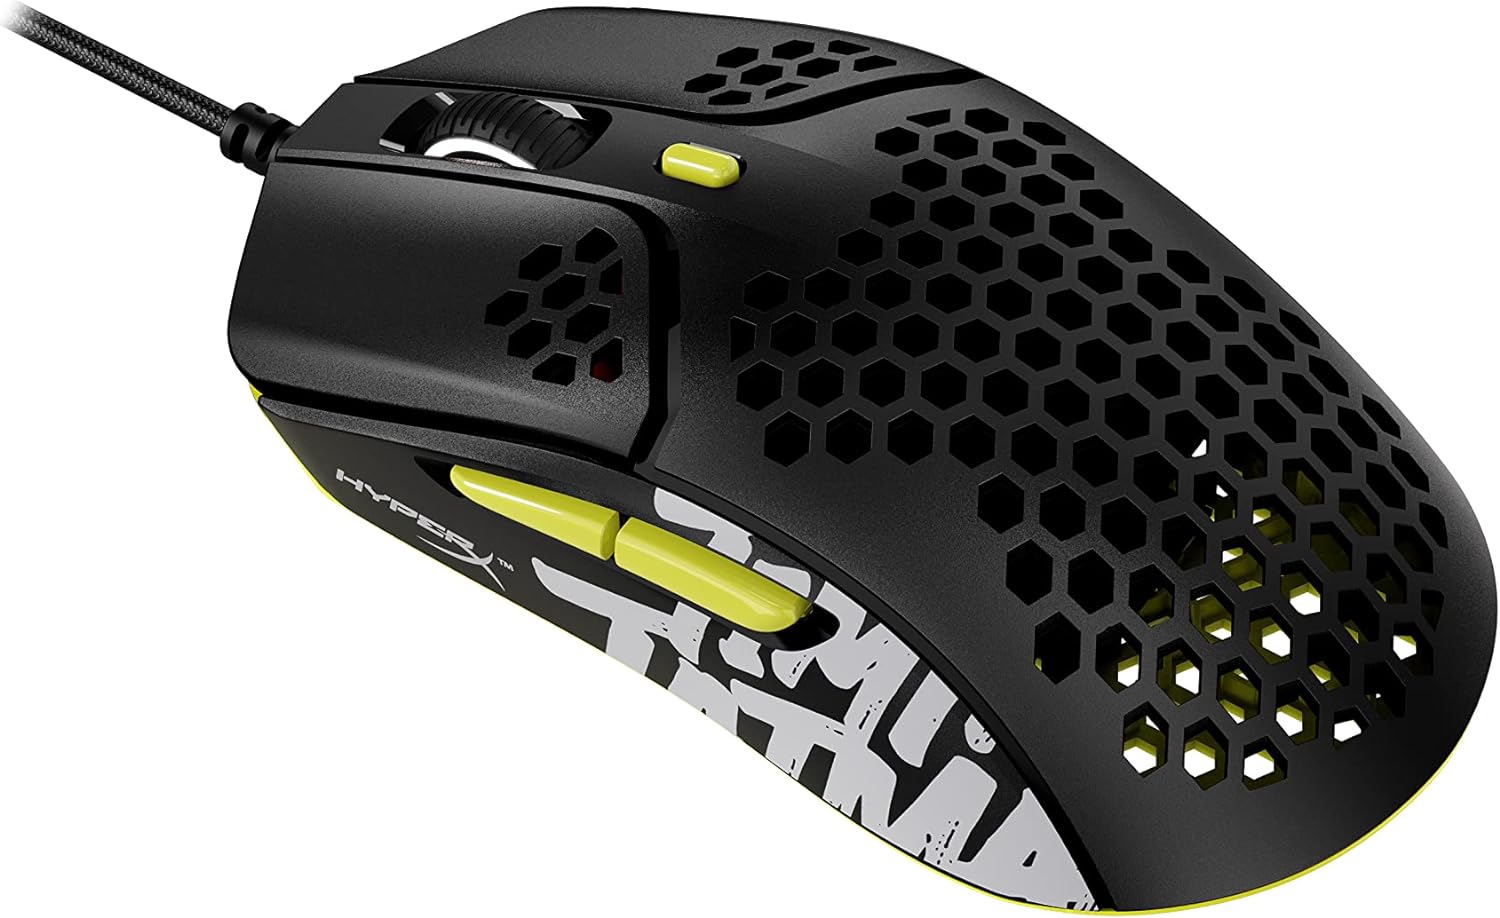 Mouse Gaming  HX Pulsefire Haste Wired TimTheTatMan Edition 16000 dPI